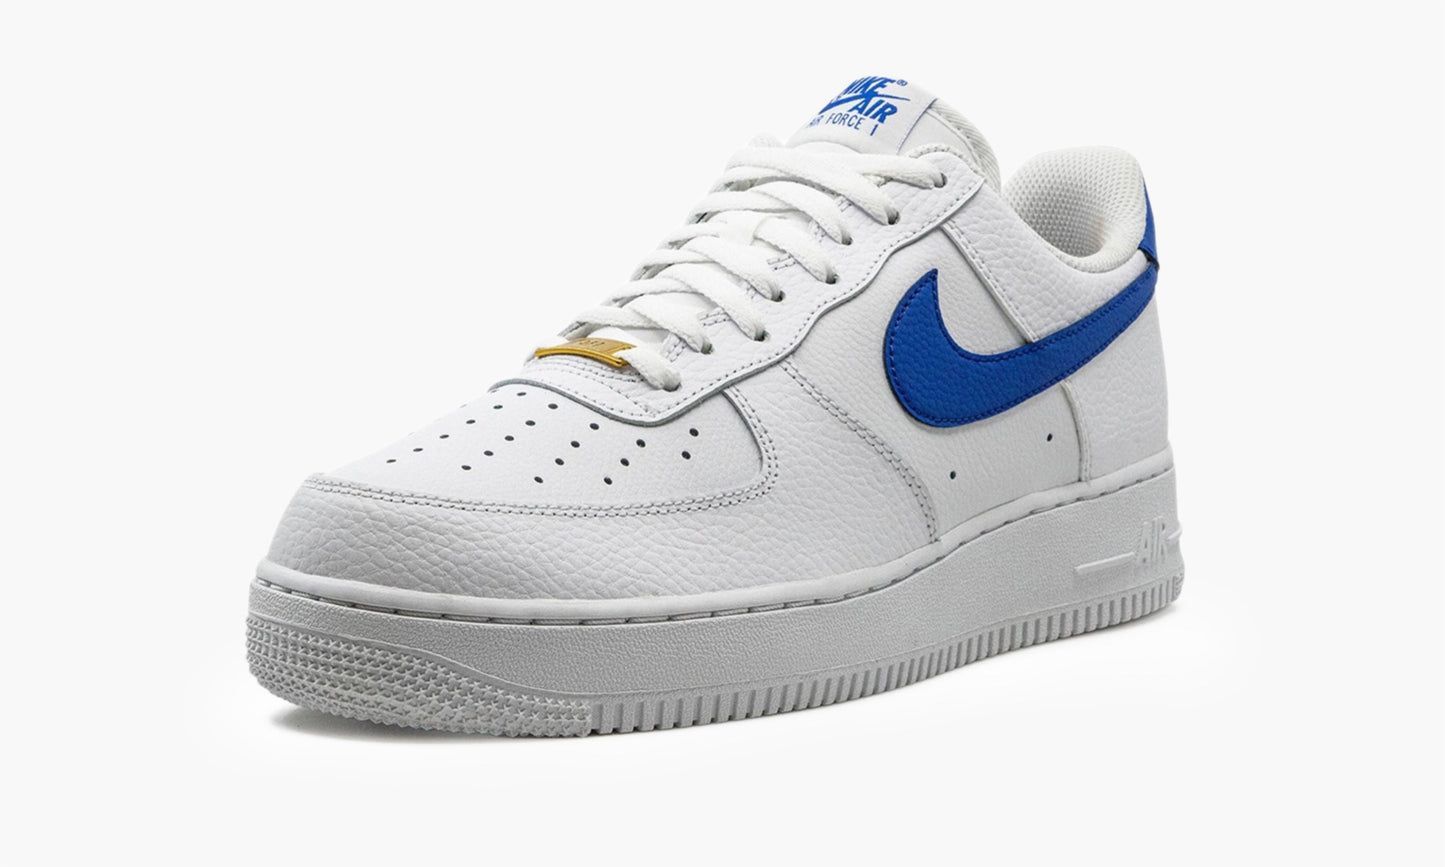 Air Force 1 Low White Royal Blue - DM2845 100 | The Sortage